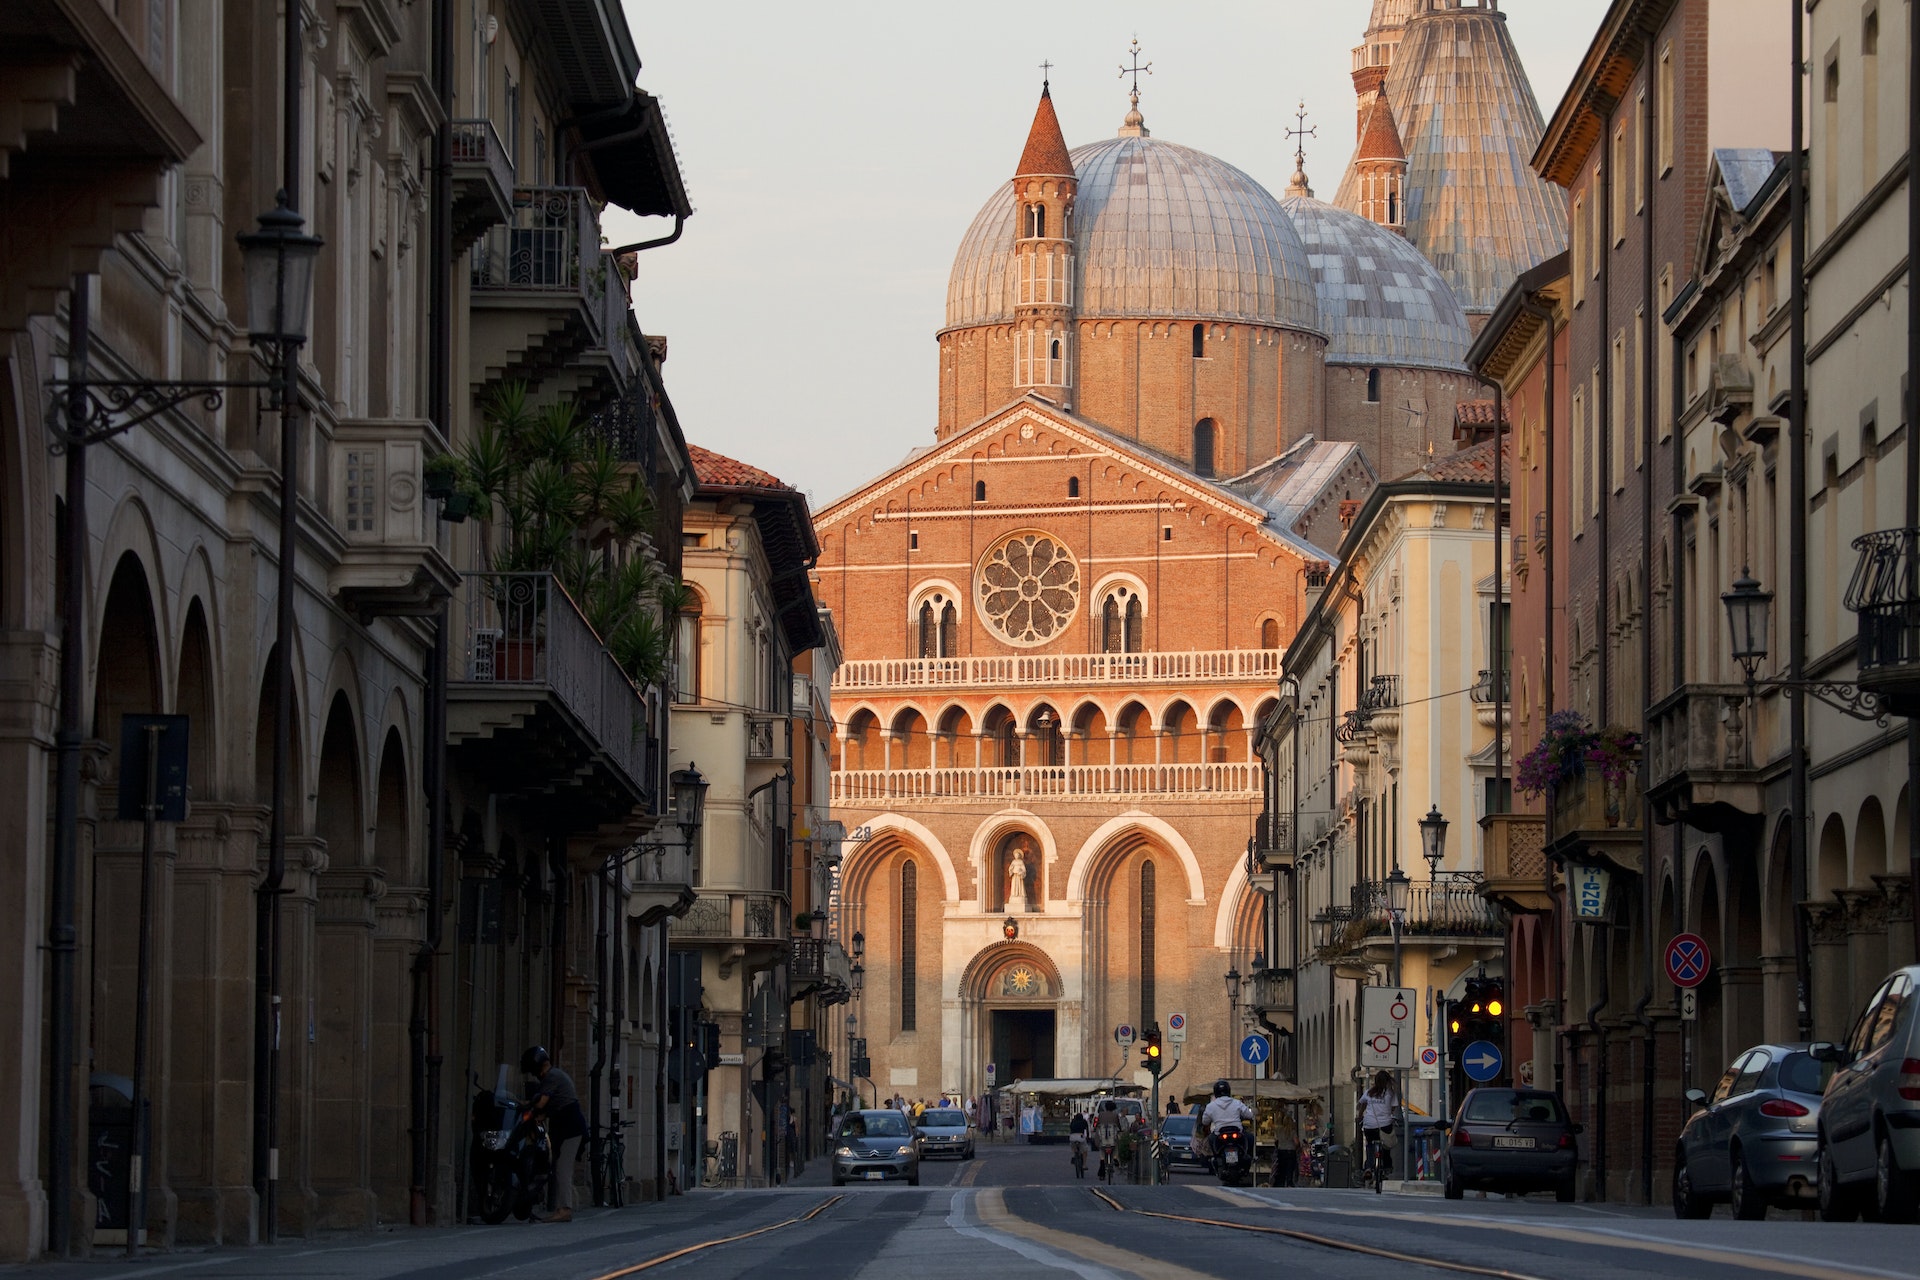 The Basilica of St Anthony at the end of the street in Padua